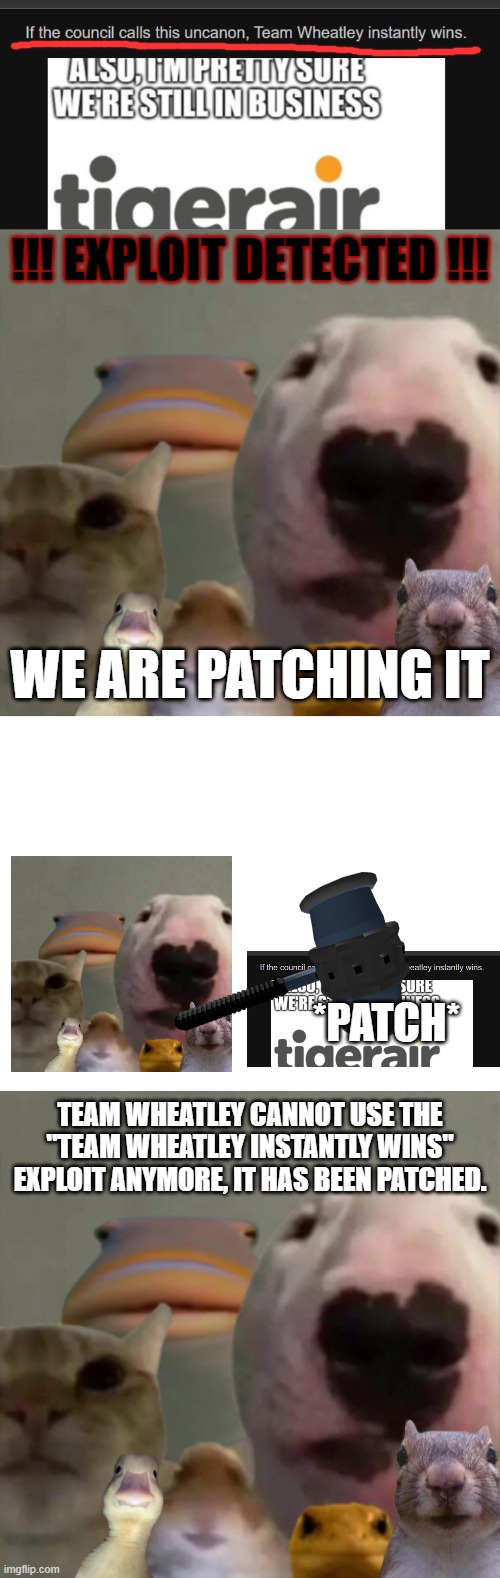 This Exploit has been patched and condeemed Uncanon permanently | !!! EXPLOIT DETECTED !!! WE ARE PATCHING IT; *PATCH*; TEAM WHEATLEY CANNOT USE THE "TEAM WHEATLEY INSTANTLY WINS" EXPLOIT ANYMORE, IT HAS BEEN PATCHED. | image tagged in the council remastered,blank white template | made w/ Imgflip meme maker